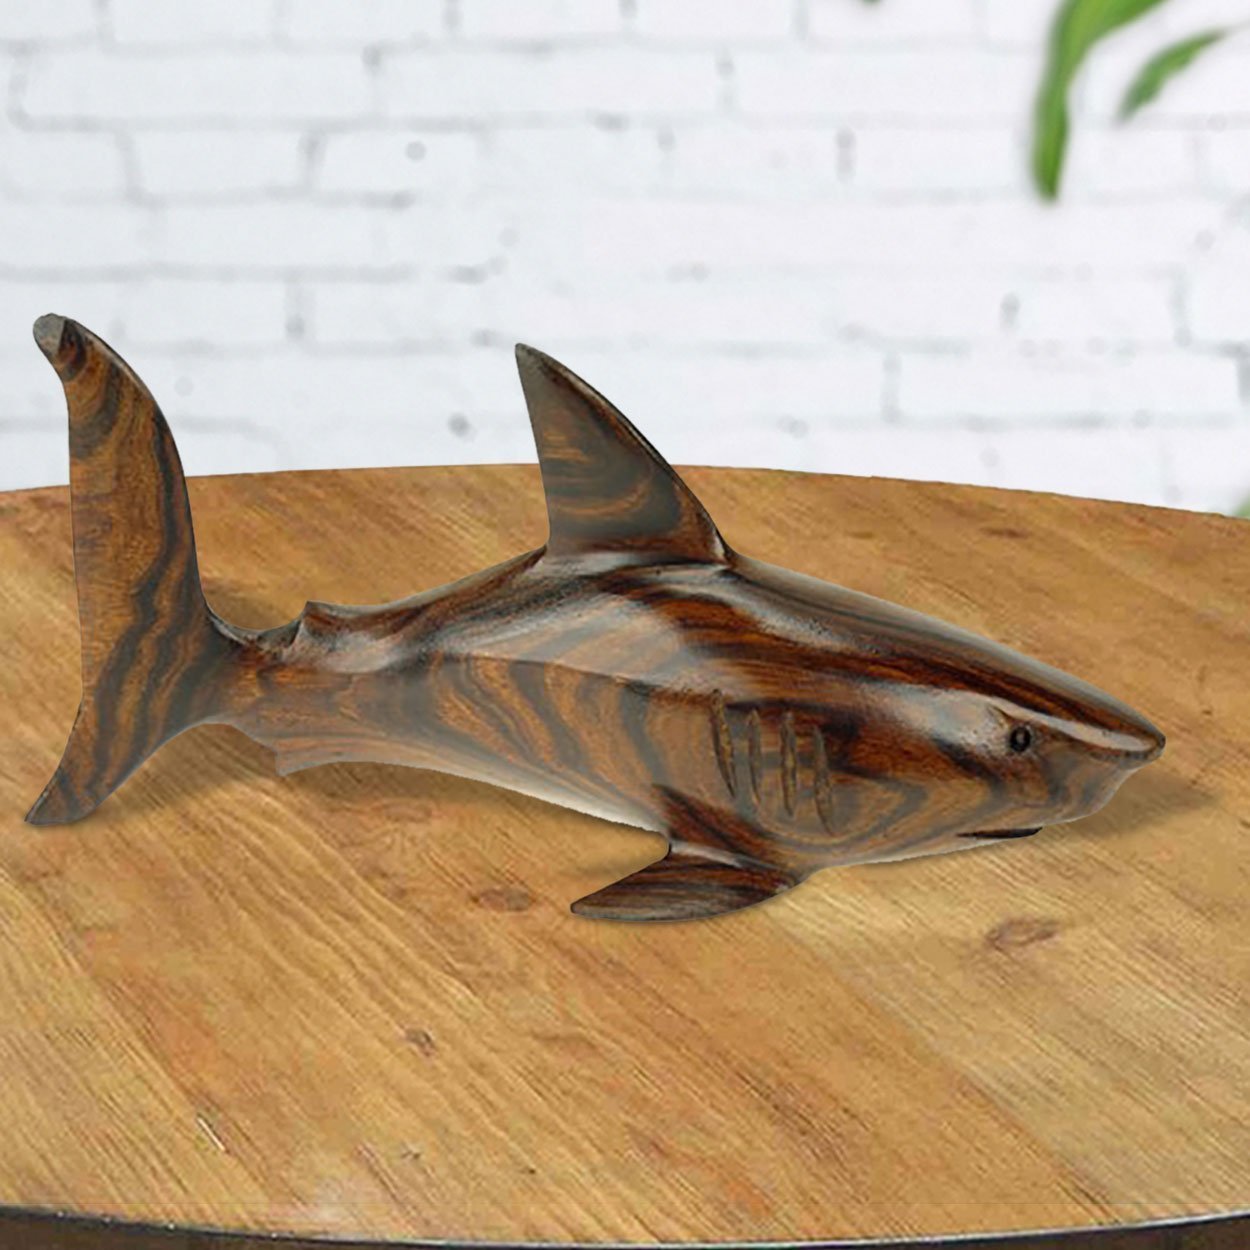 172263 - 6-7in Long Shark Ironwood Carving